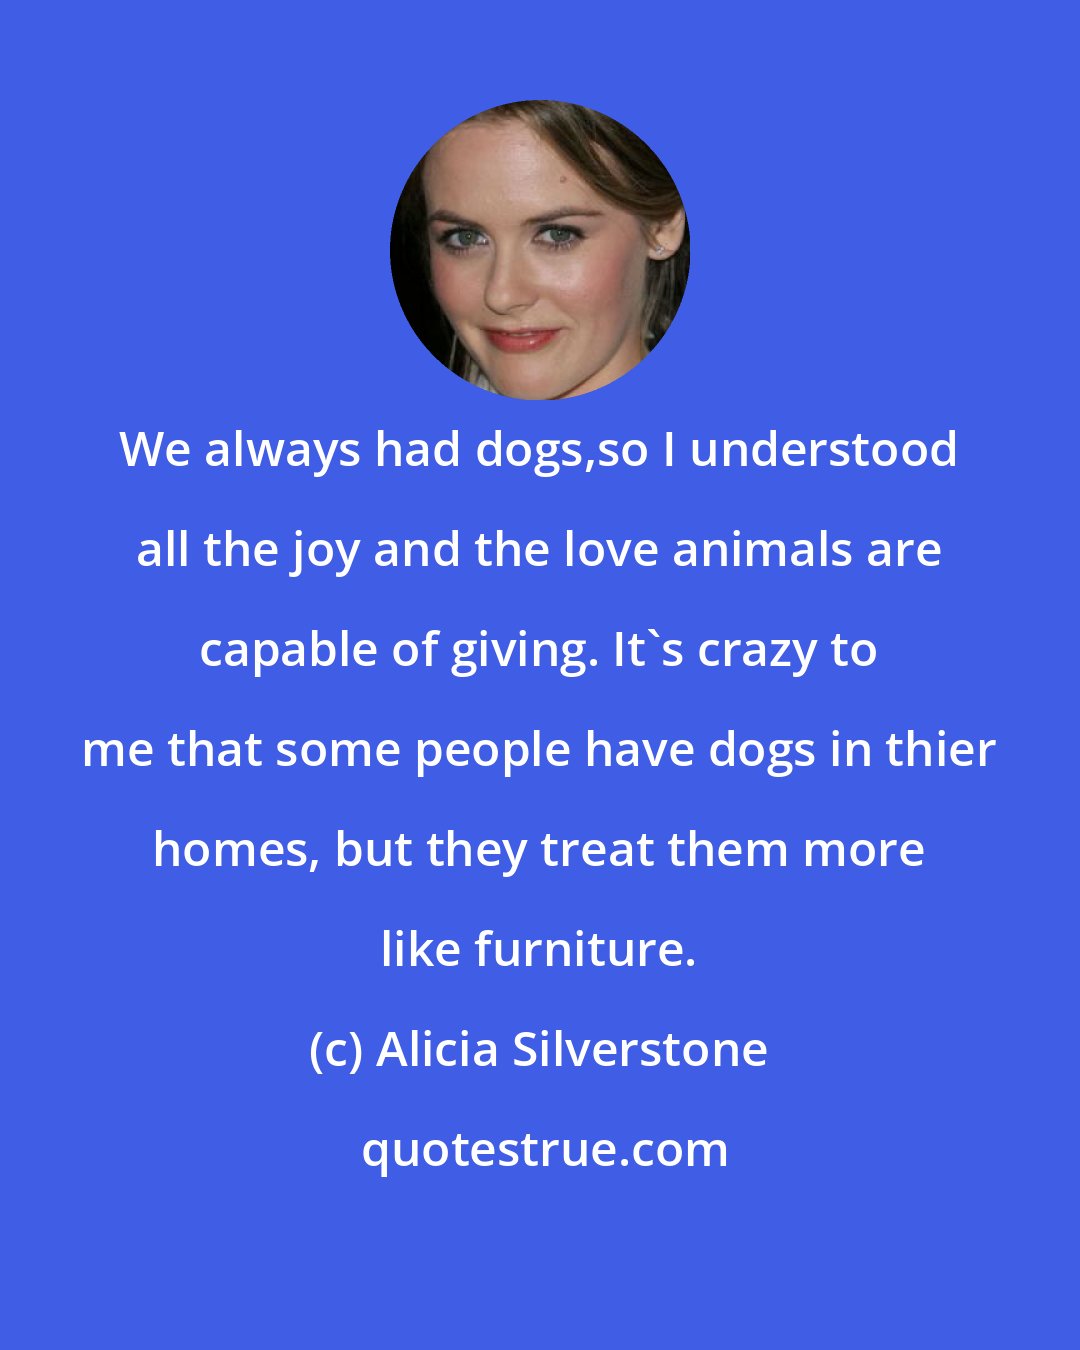 Alicia Silverstone: We always had dogs,so I understood all the joy and the love animals are capable of giving. It's crazy to me that some people have dogs in thier homes, but they treat them more like furniture.